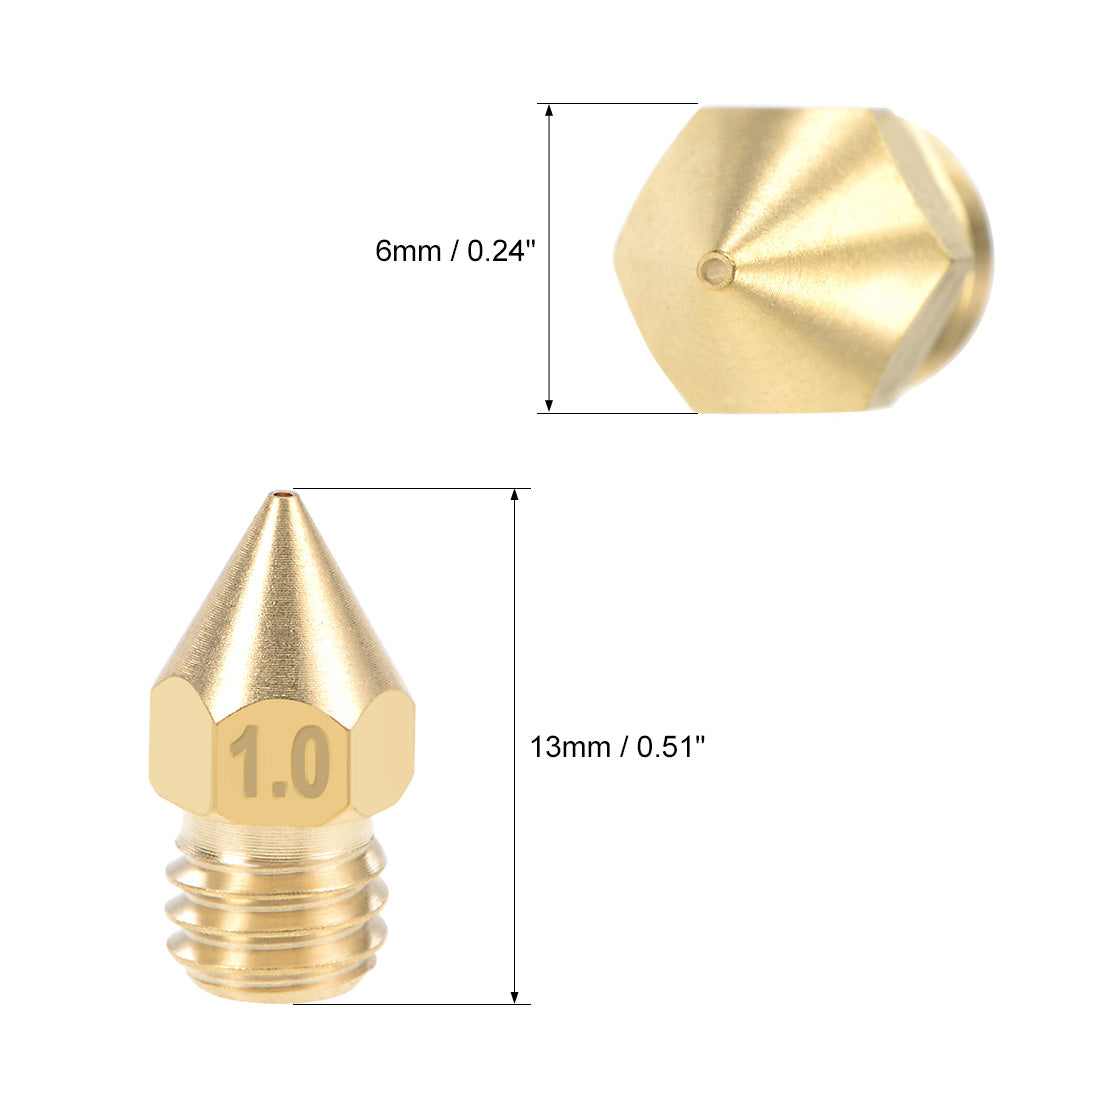 uxcell Uxcell 1mm 3D Printer Nozzle Head M6 for MK8 1.75mm Extruder Print, Brass 6pcs